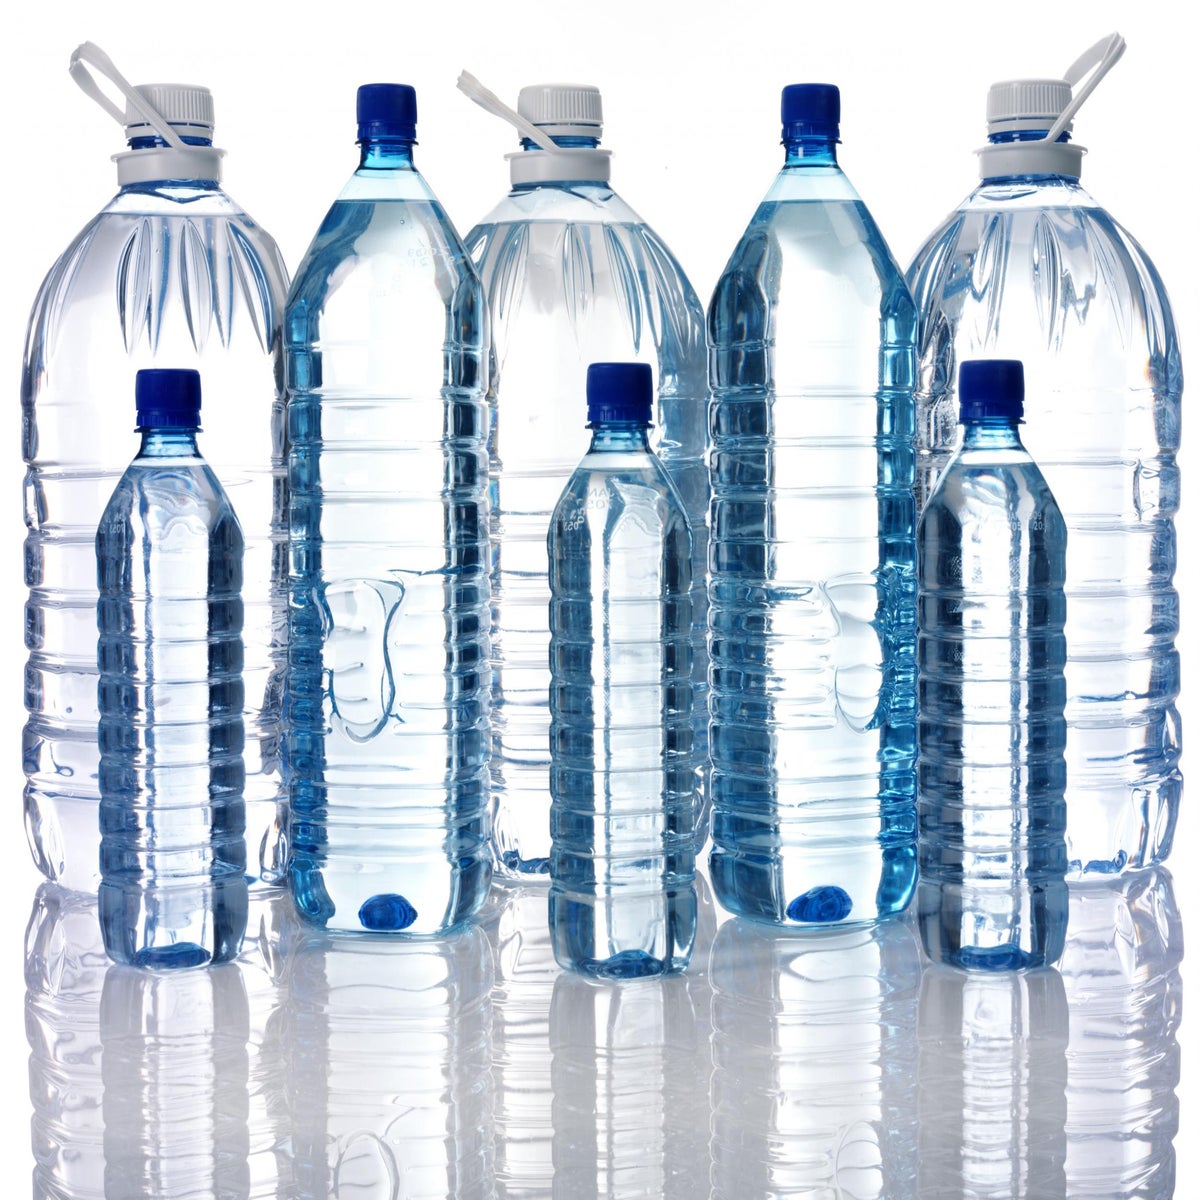 https://static.independent.co.uk/s3fs-public/thumbnails/image/2018/03/15/07/bottled-water.jpg?width=1200&height=1200&fit=crop